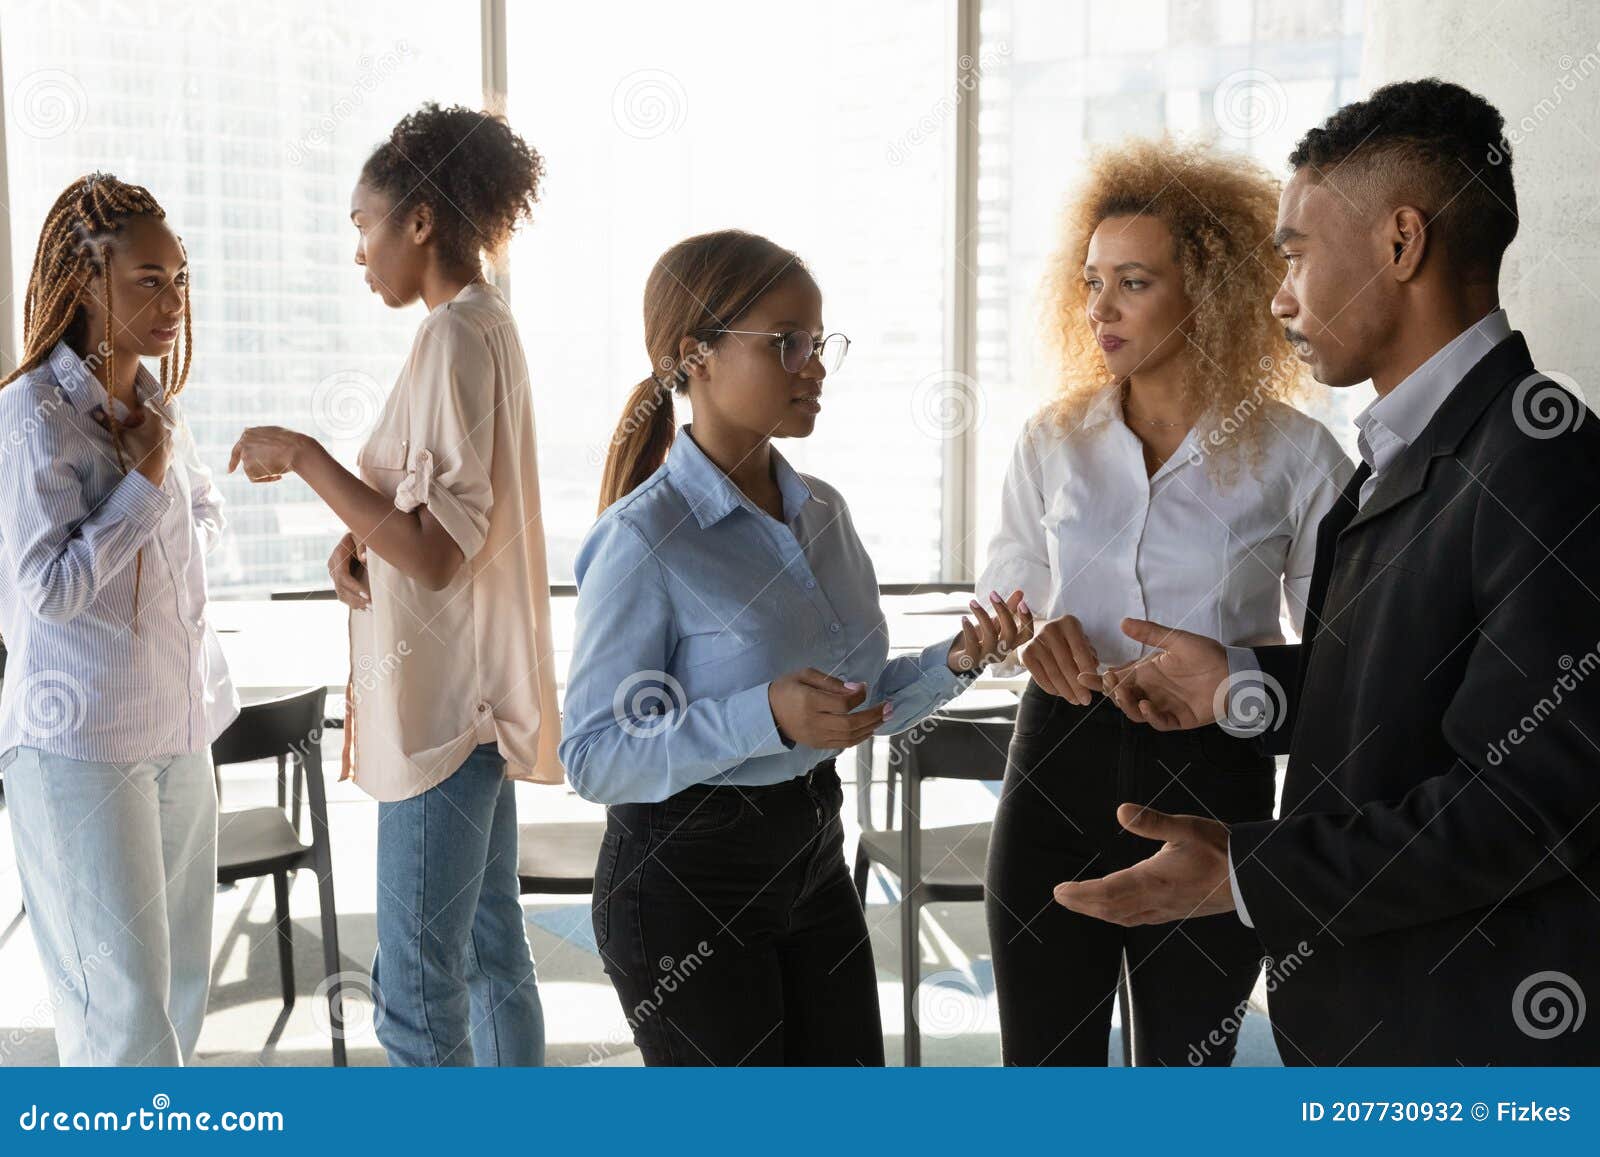 Multiracial Colleagues Talk In Groups In Office Together Stock Photo